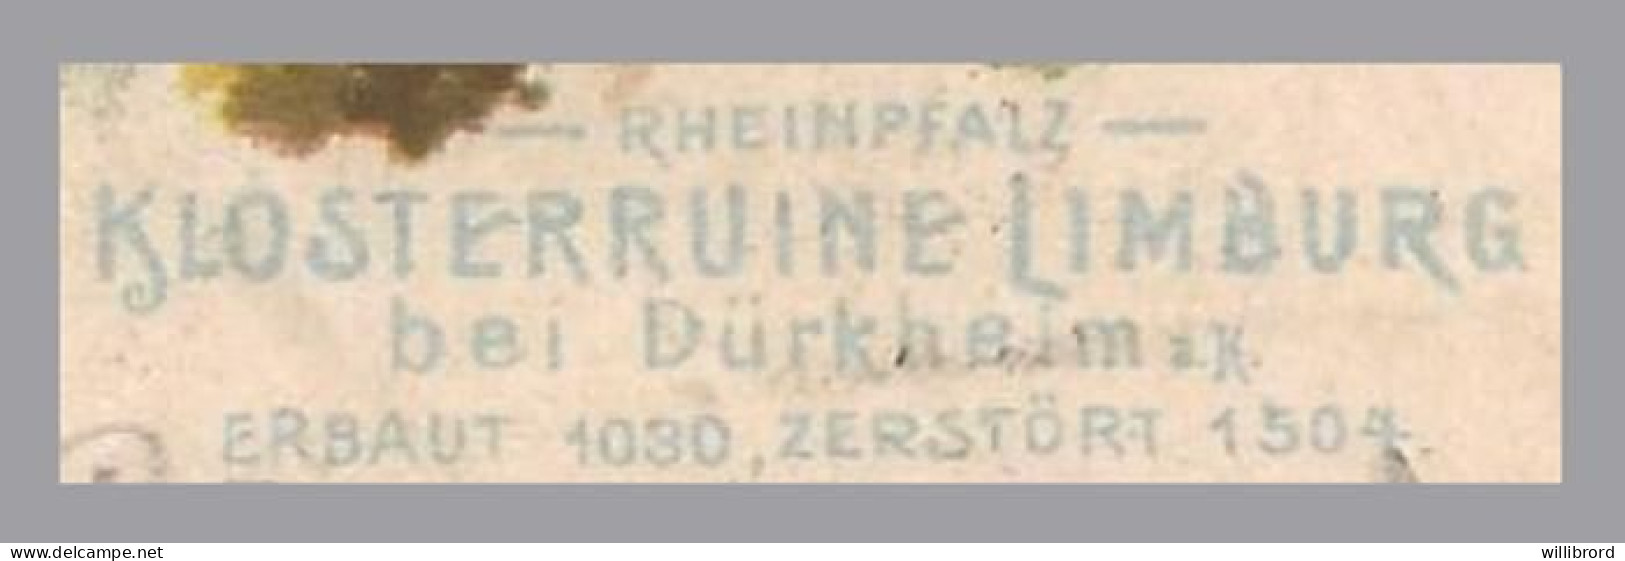 LUXEMBOURG -1900 TWICE REDIRECTED MAIL - Bavaria - Germany - Esch Alzette, Luxembourg - Taxed Cross-border - Taxes